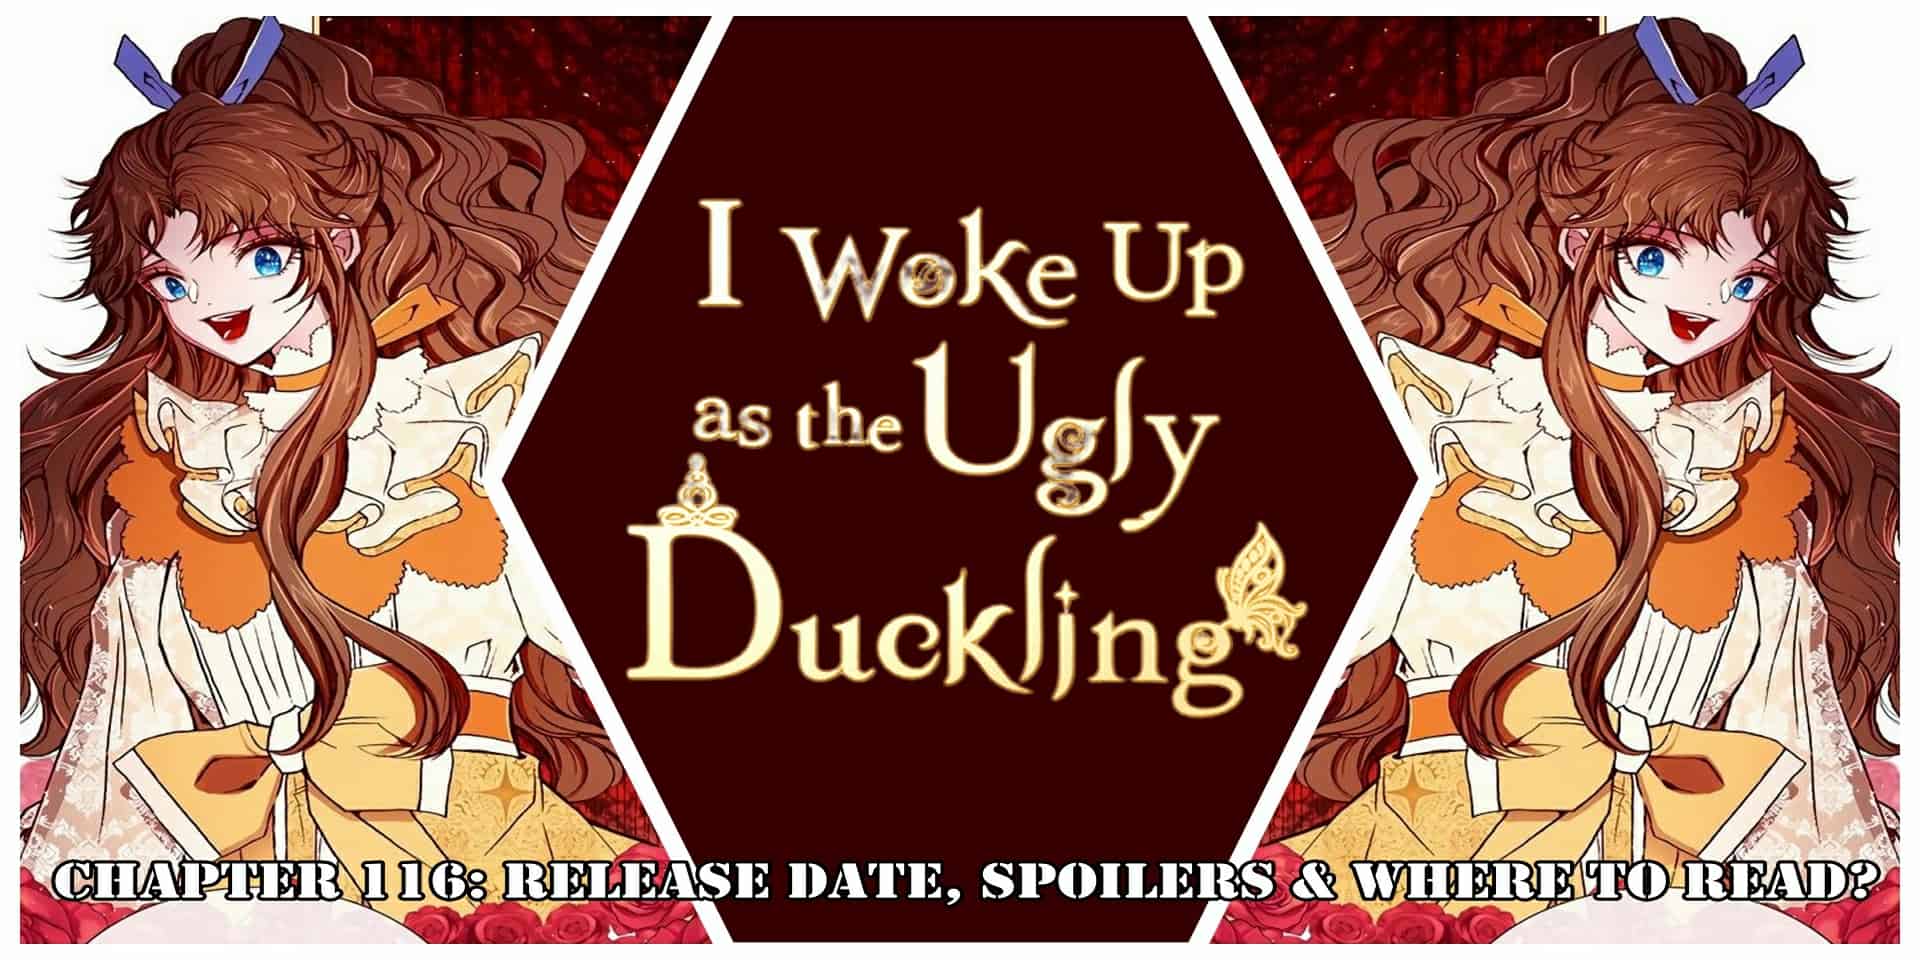 I Became The Ugly Lady Chapter 116: Release Date, Spoilers & Where to Read?